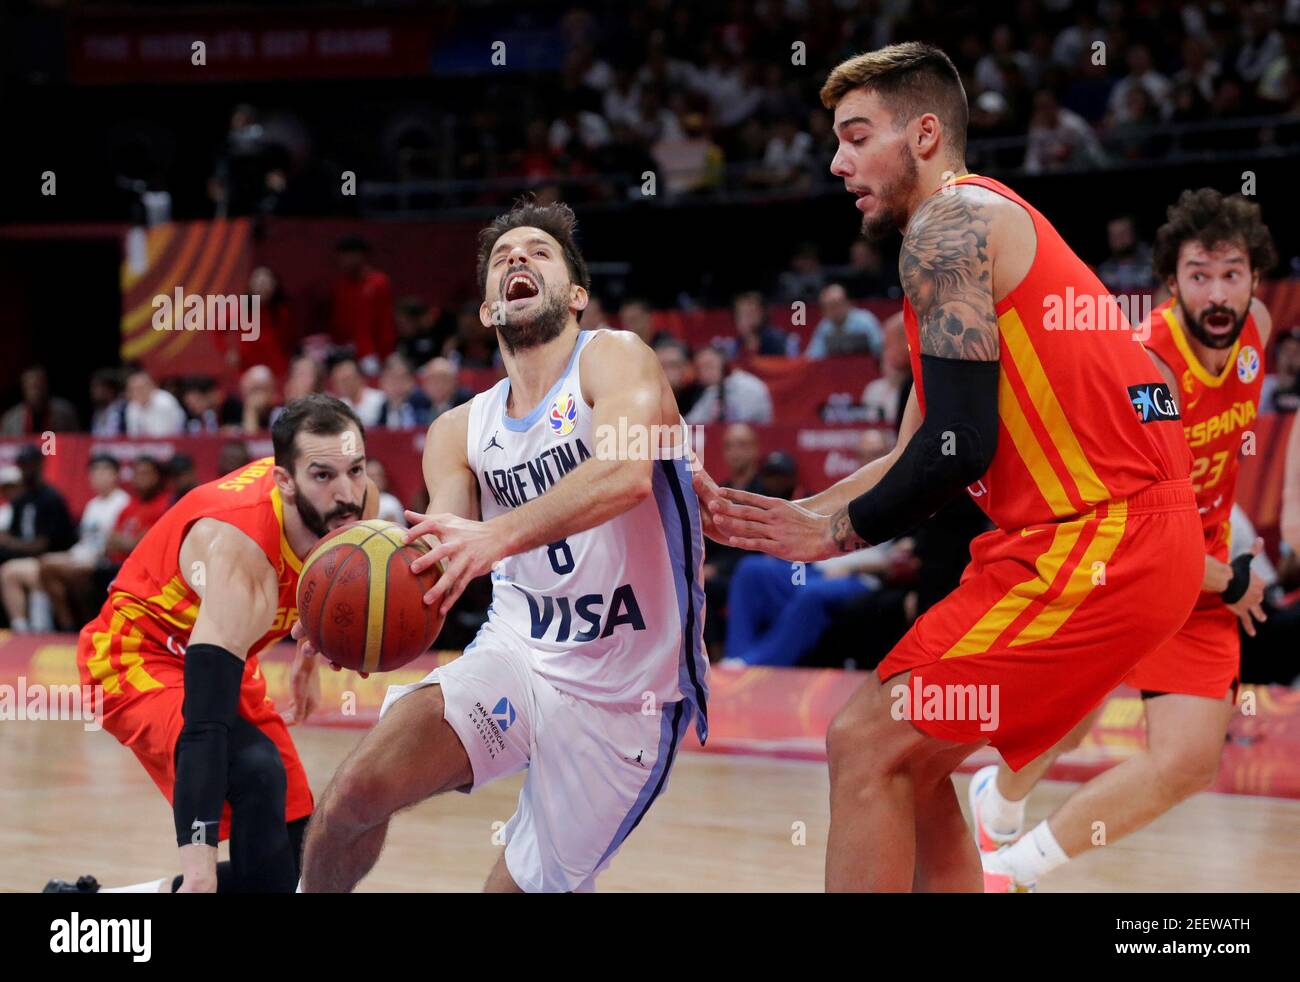 Basketball - FIBA World Cup - Final - Argentina v Spain - Wukesong Sport Arena, Beijing, China - September 15, 2019  Argentina's Nicolas Laprovittola in action  REUTERS/Jason Lee Stock Photo